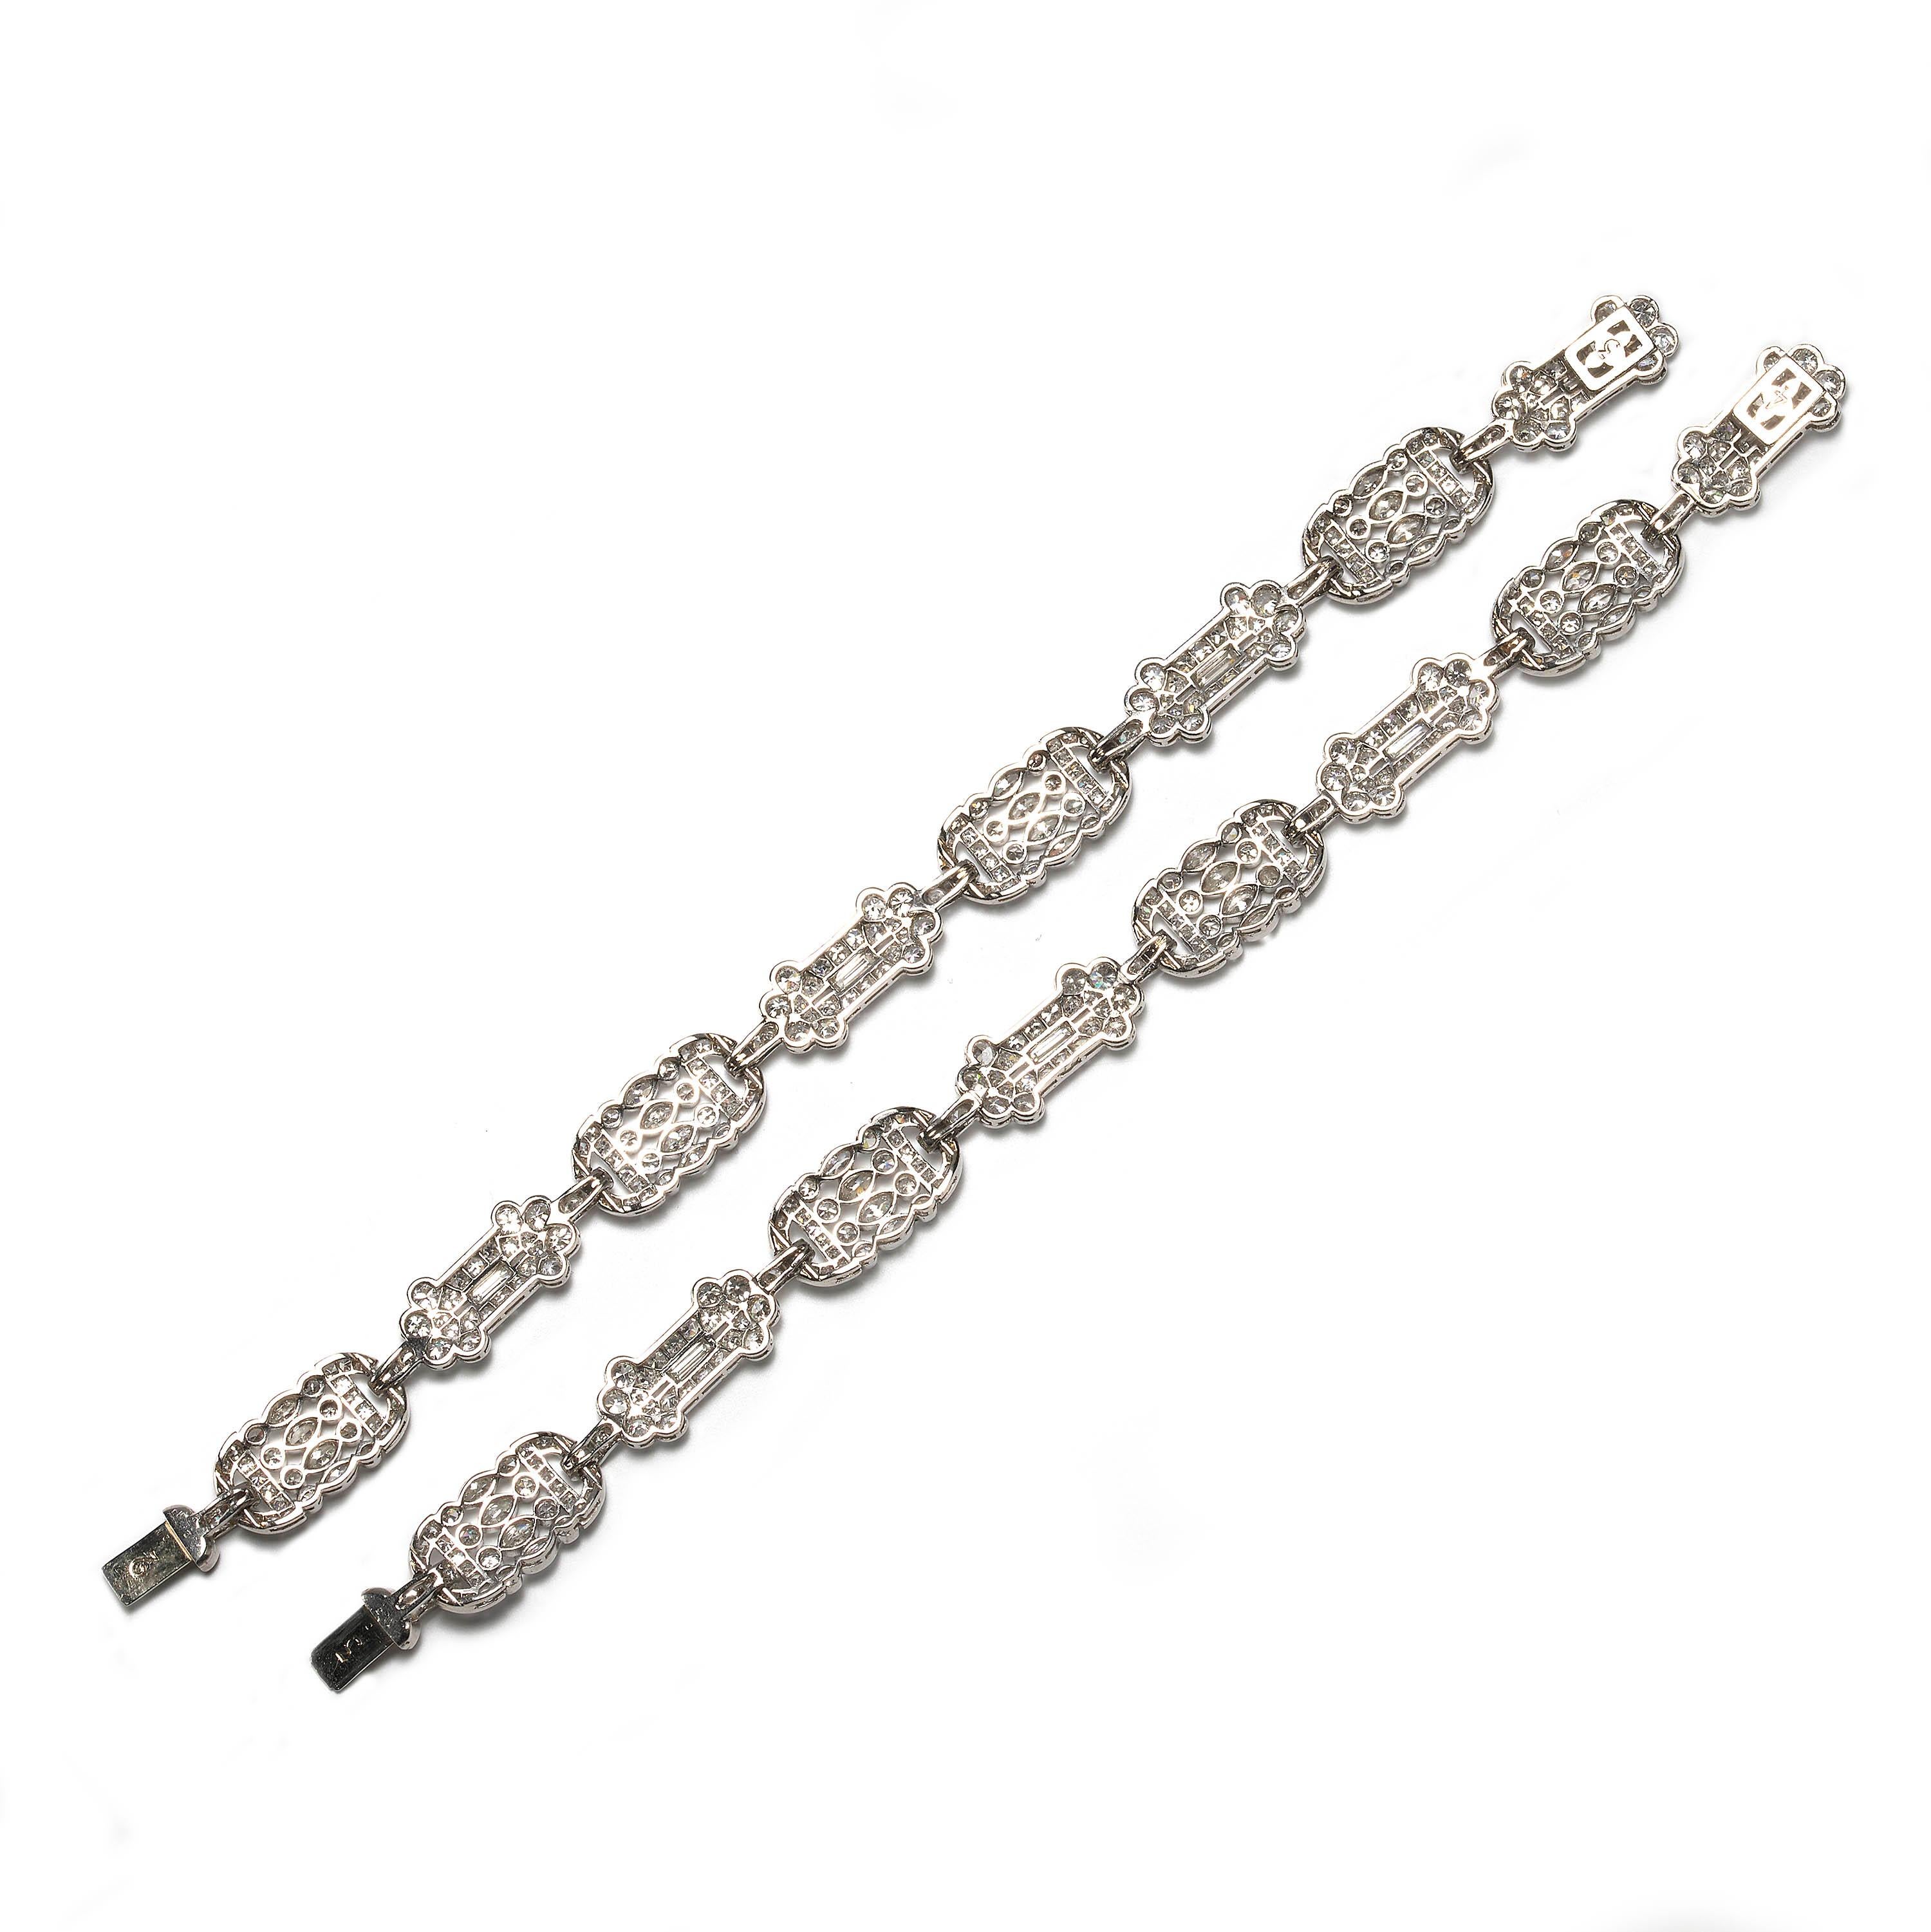 Early 20th Century French Diamond Necklace or Bracelets For Sale 1